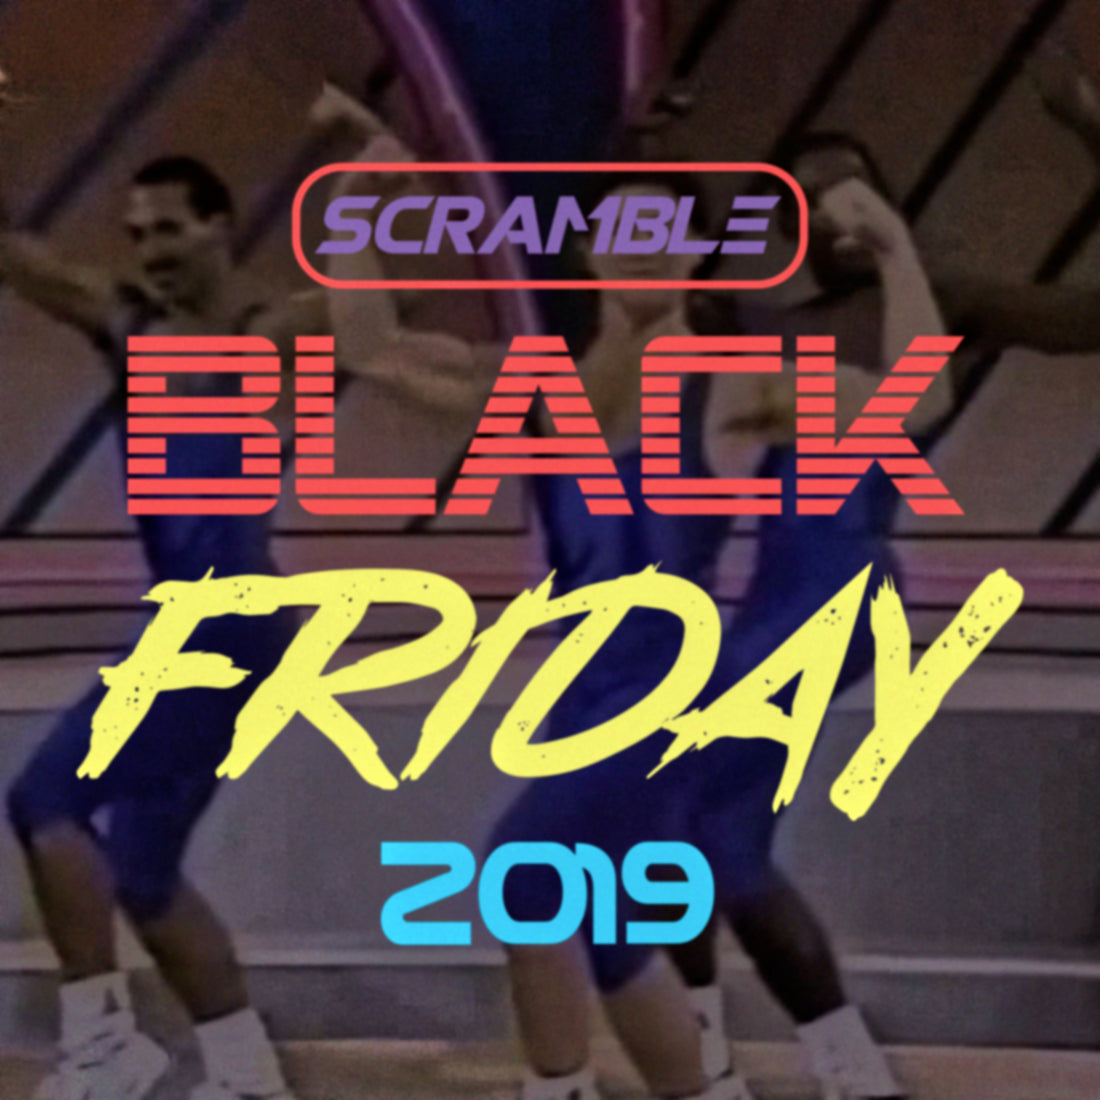 SCRAMBLE BLACK FRIDAY 2019 – DEALS TO WATCH OUT FOR